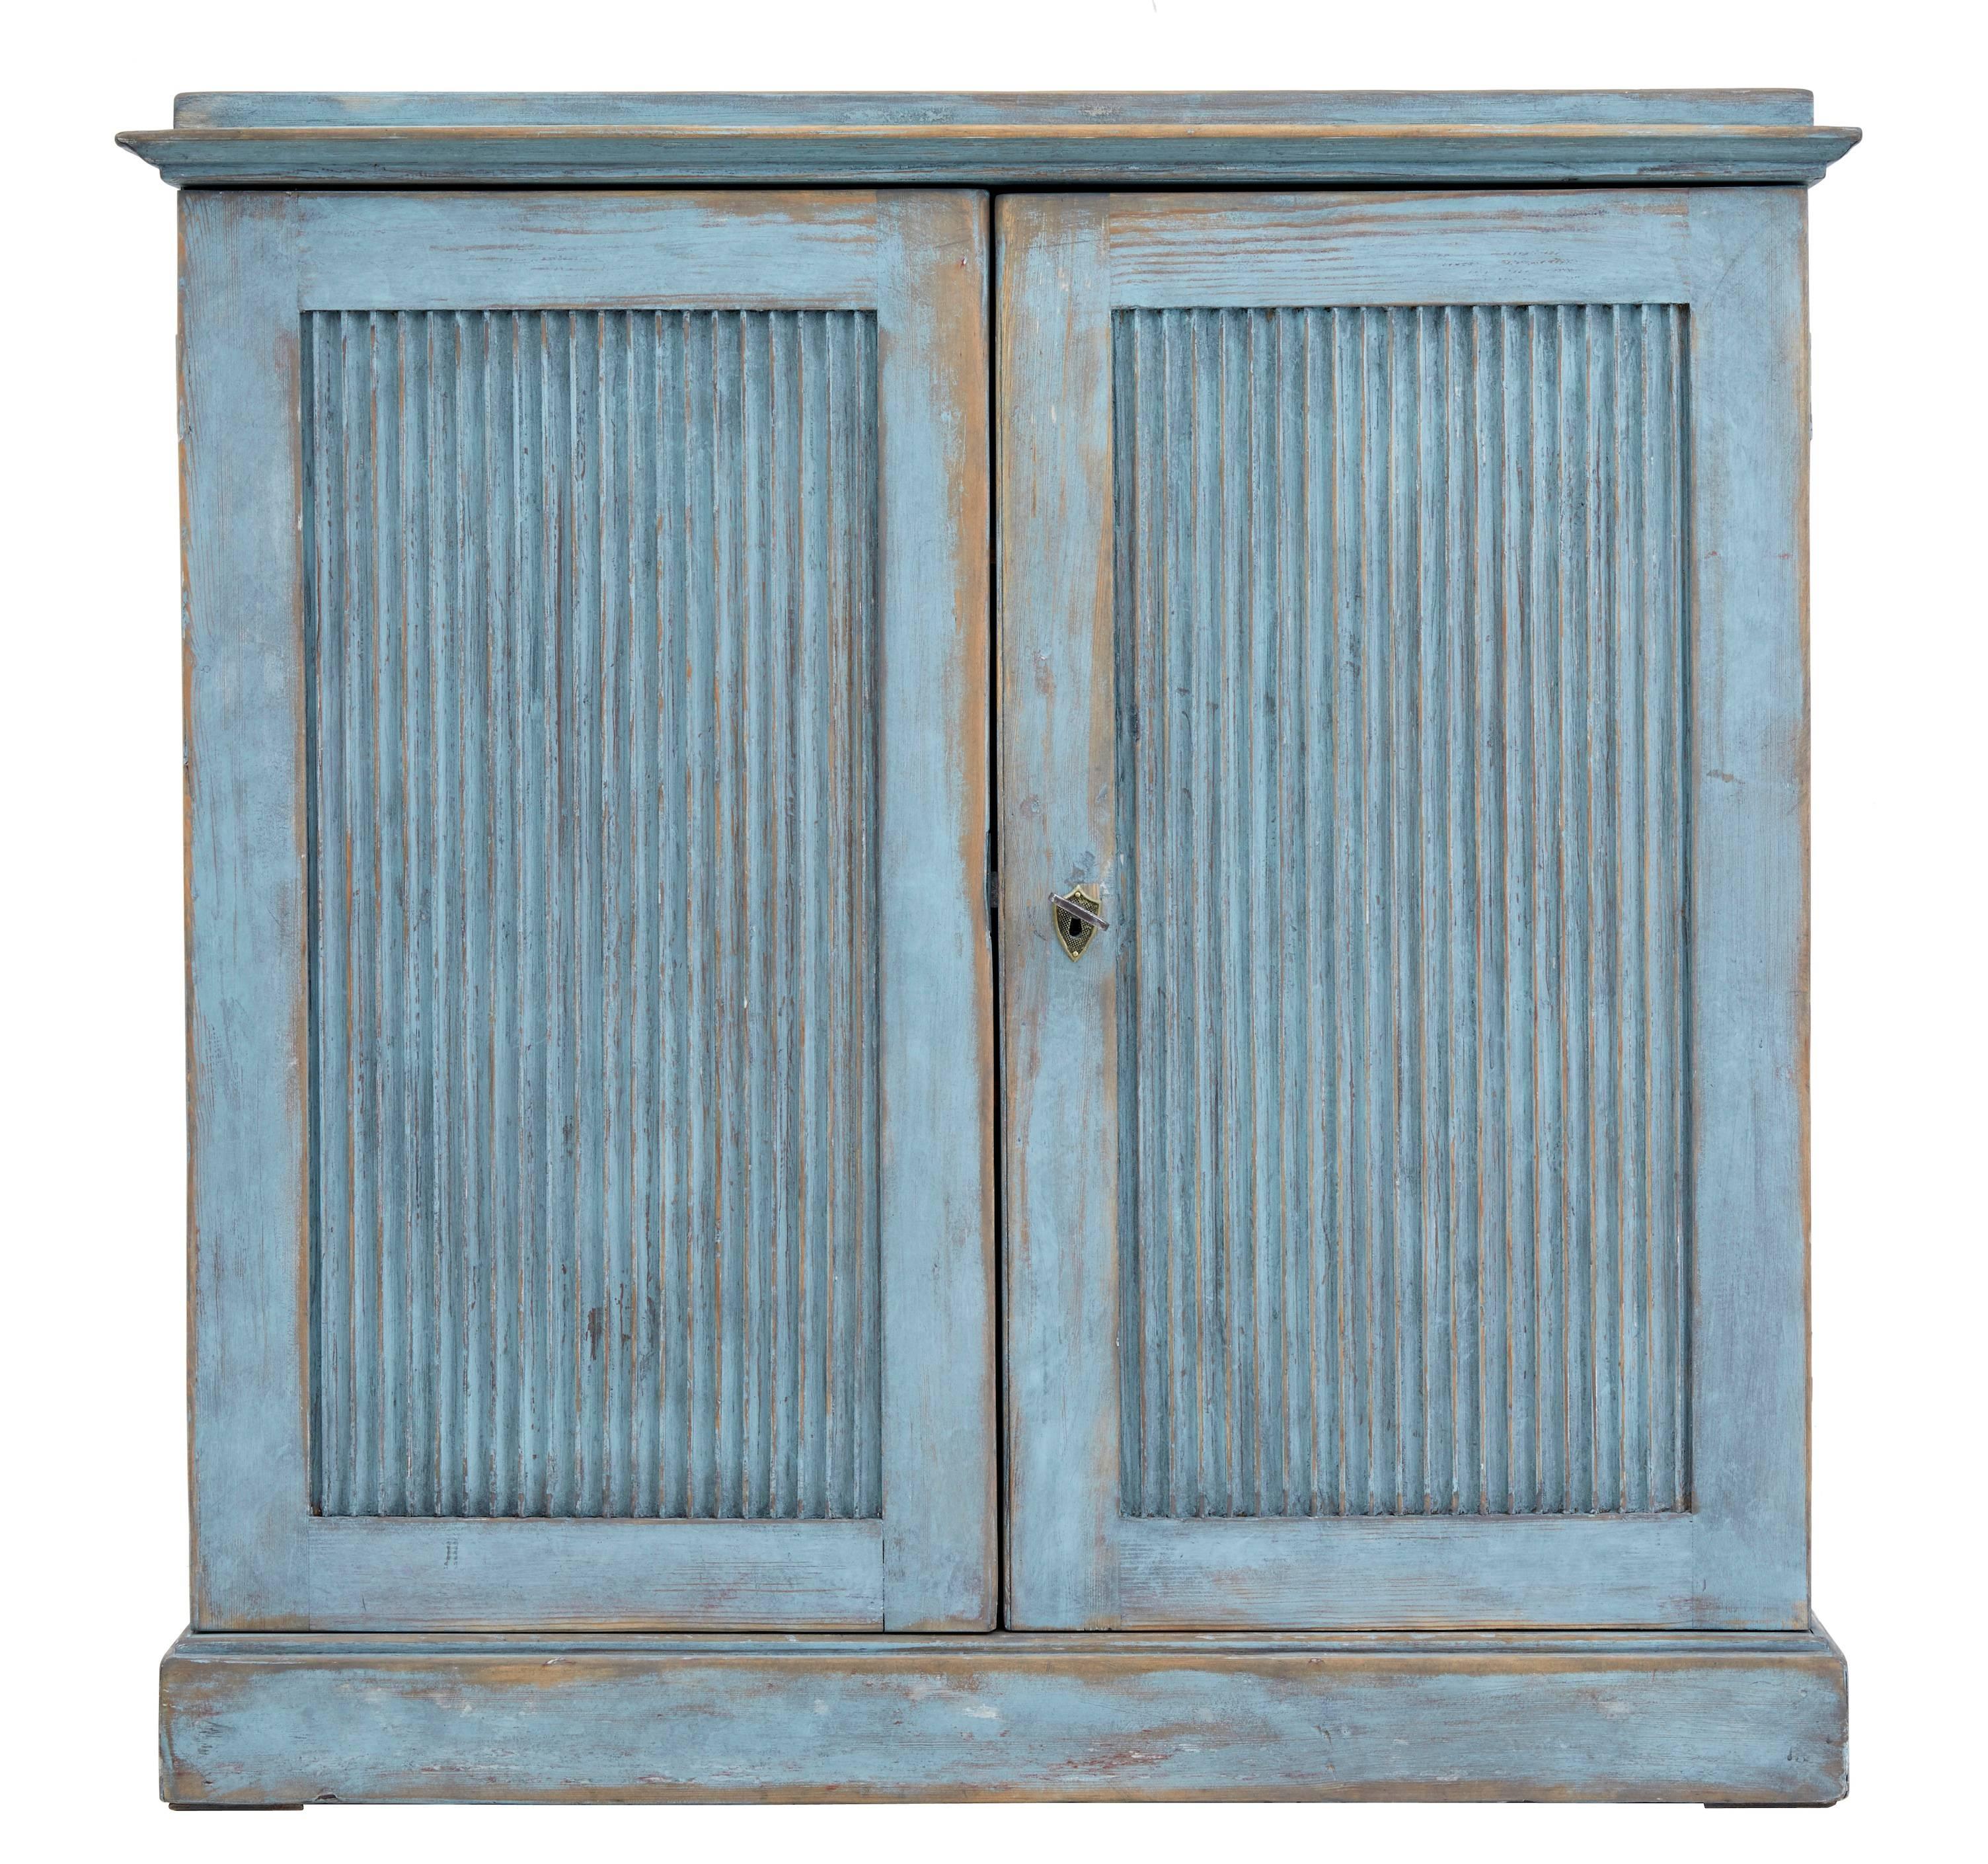 19th century Swedish cupboard, circa 1870.
Double door cupboard with carved linen fold detailing to the fronts.
Two shelves. Good quality rustic pine piece.

Measures: Height 39"
Width 39 1/4"
Depth 17".